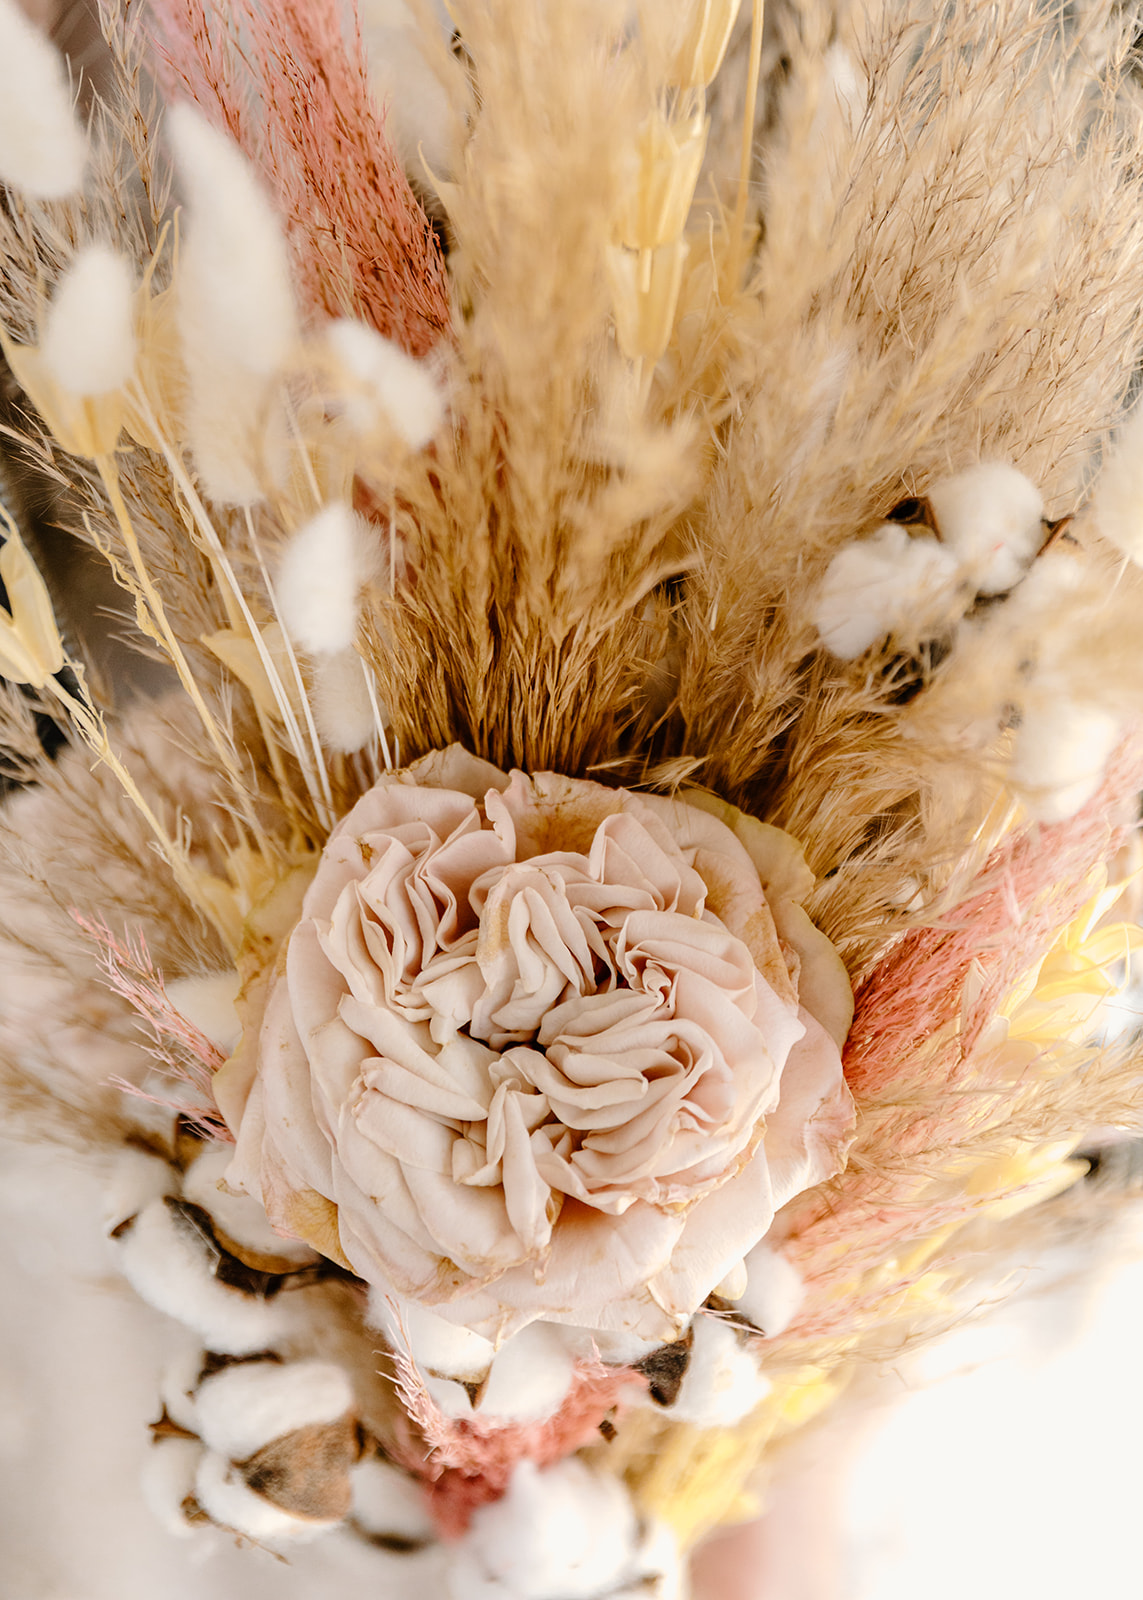 A mix of dried and fresh florals for elopement inspiration with peach and mustard hues